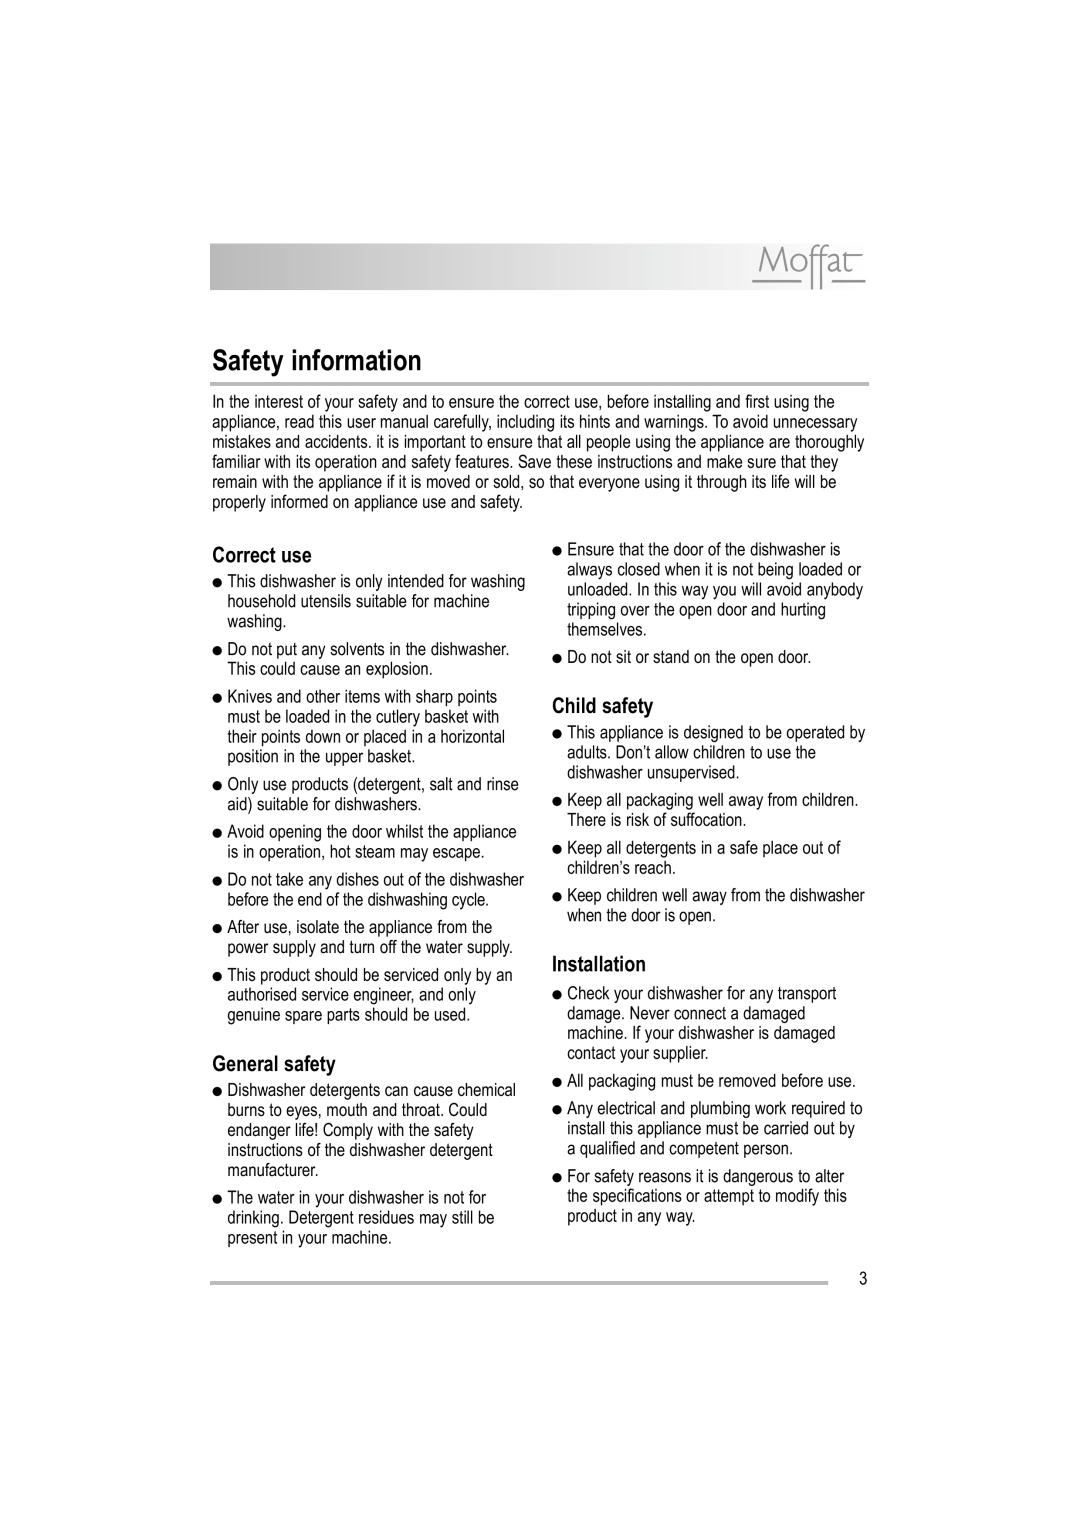 Moffat MDW 542 user manual Safety information, Correct use, General safety, Child safety, Installation 